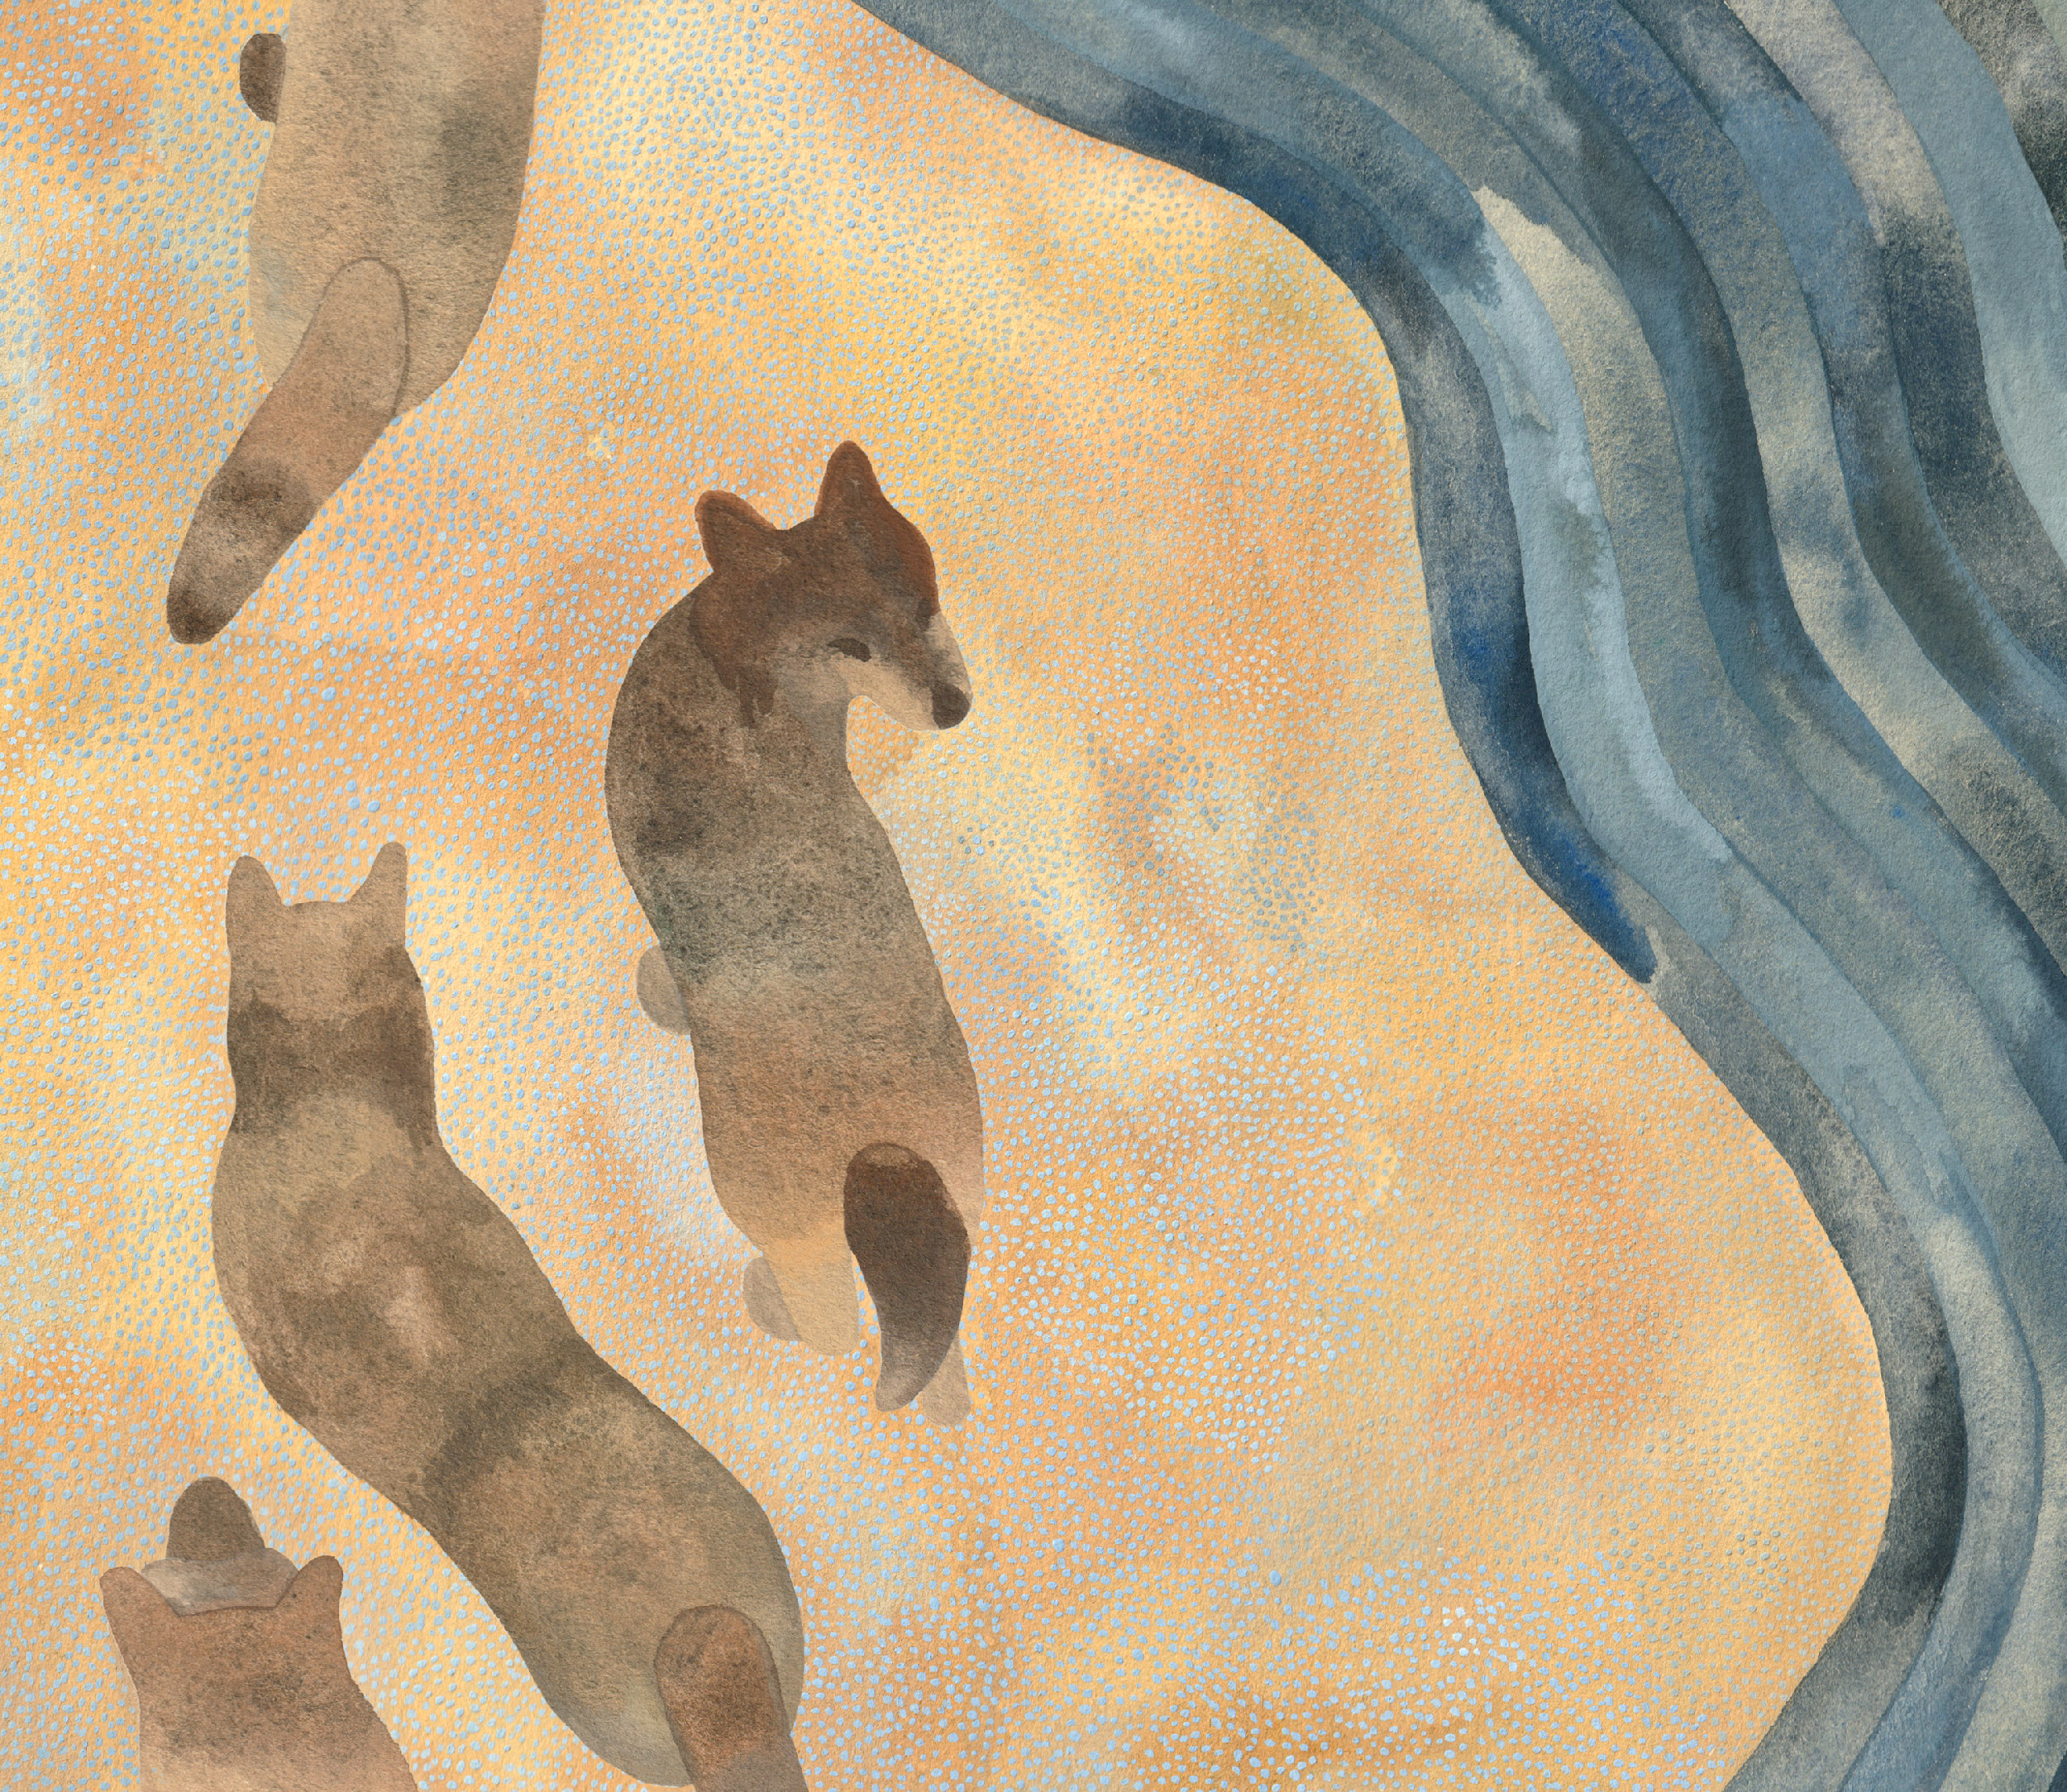 Painting of wolves on a beach close to the Ocean from a viewpoint above the beach. One wolf is looking up.